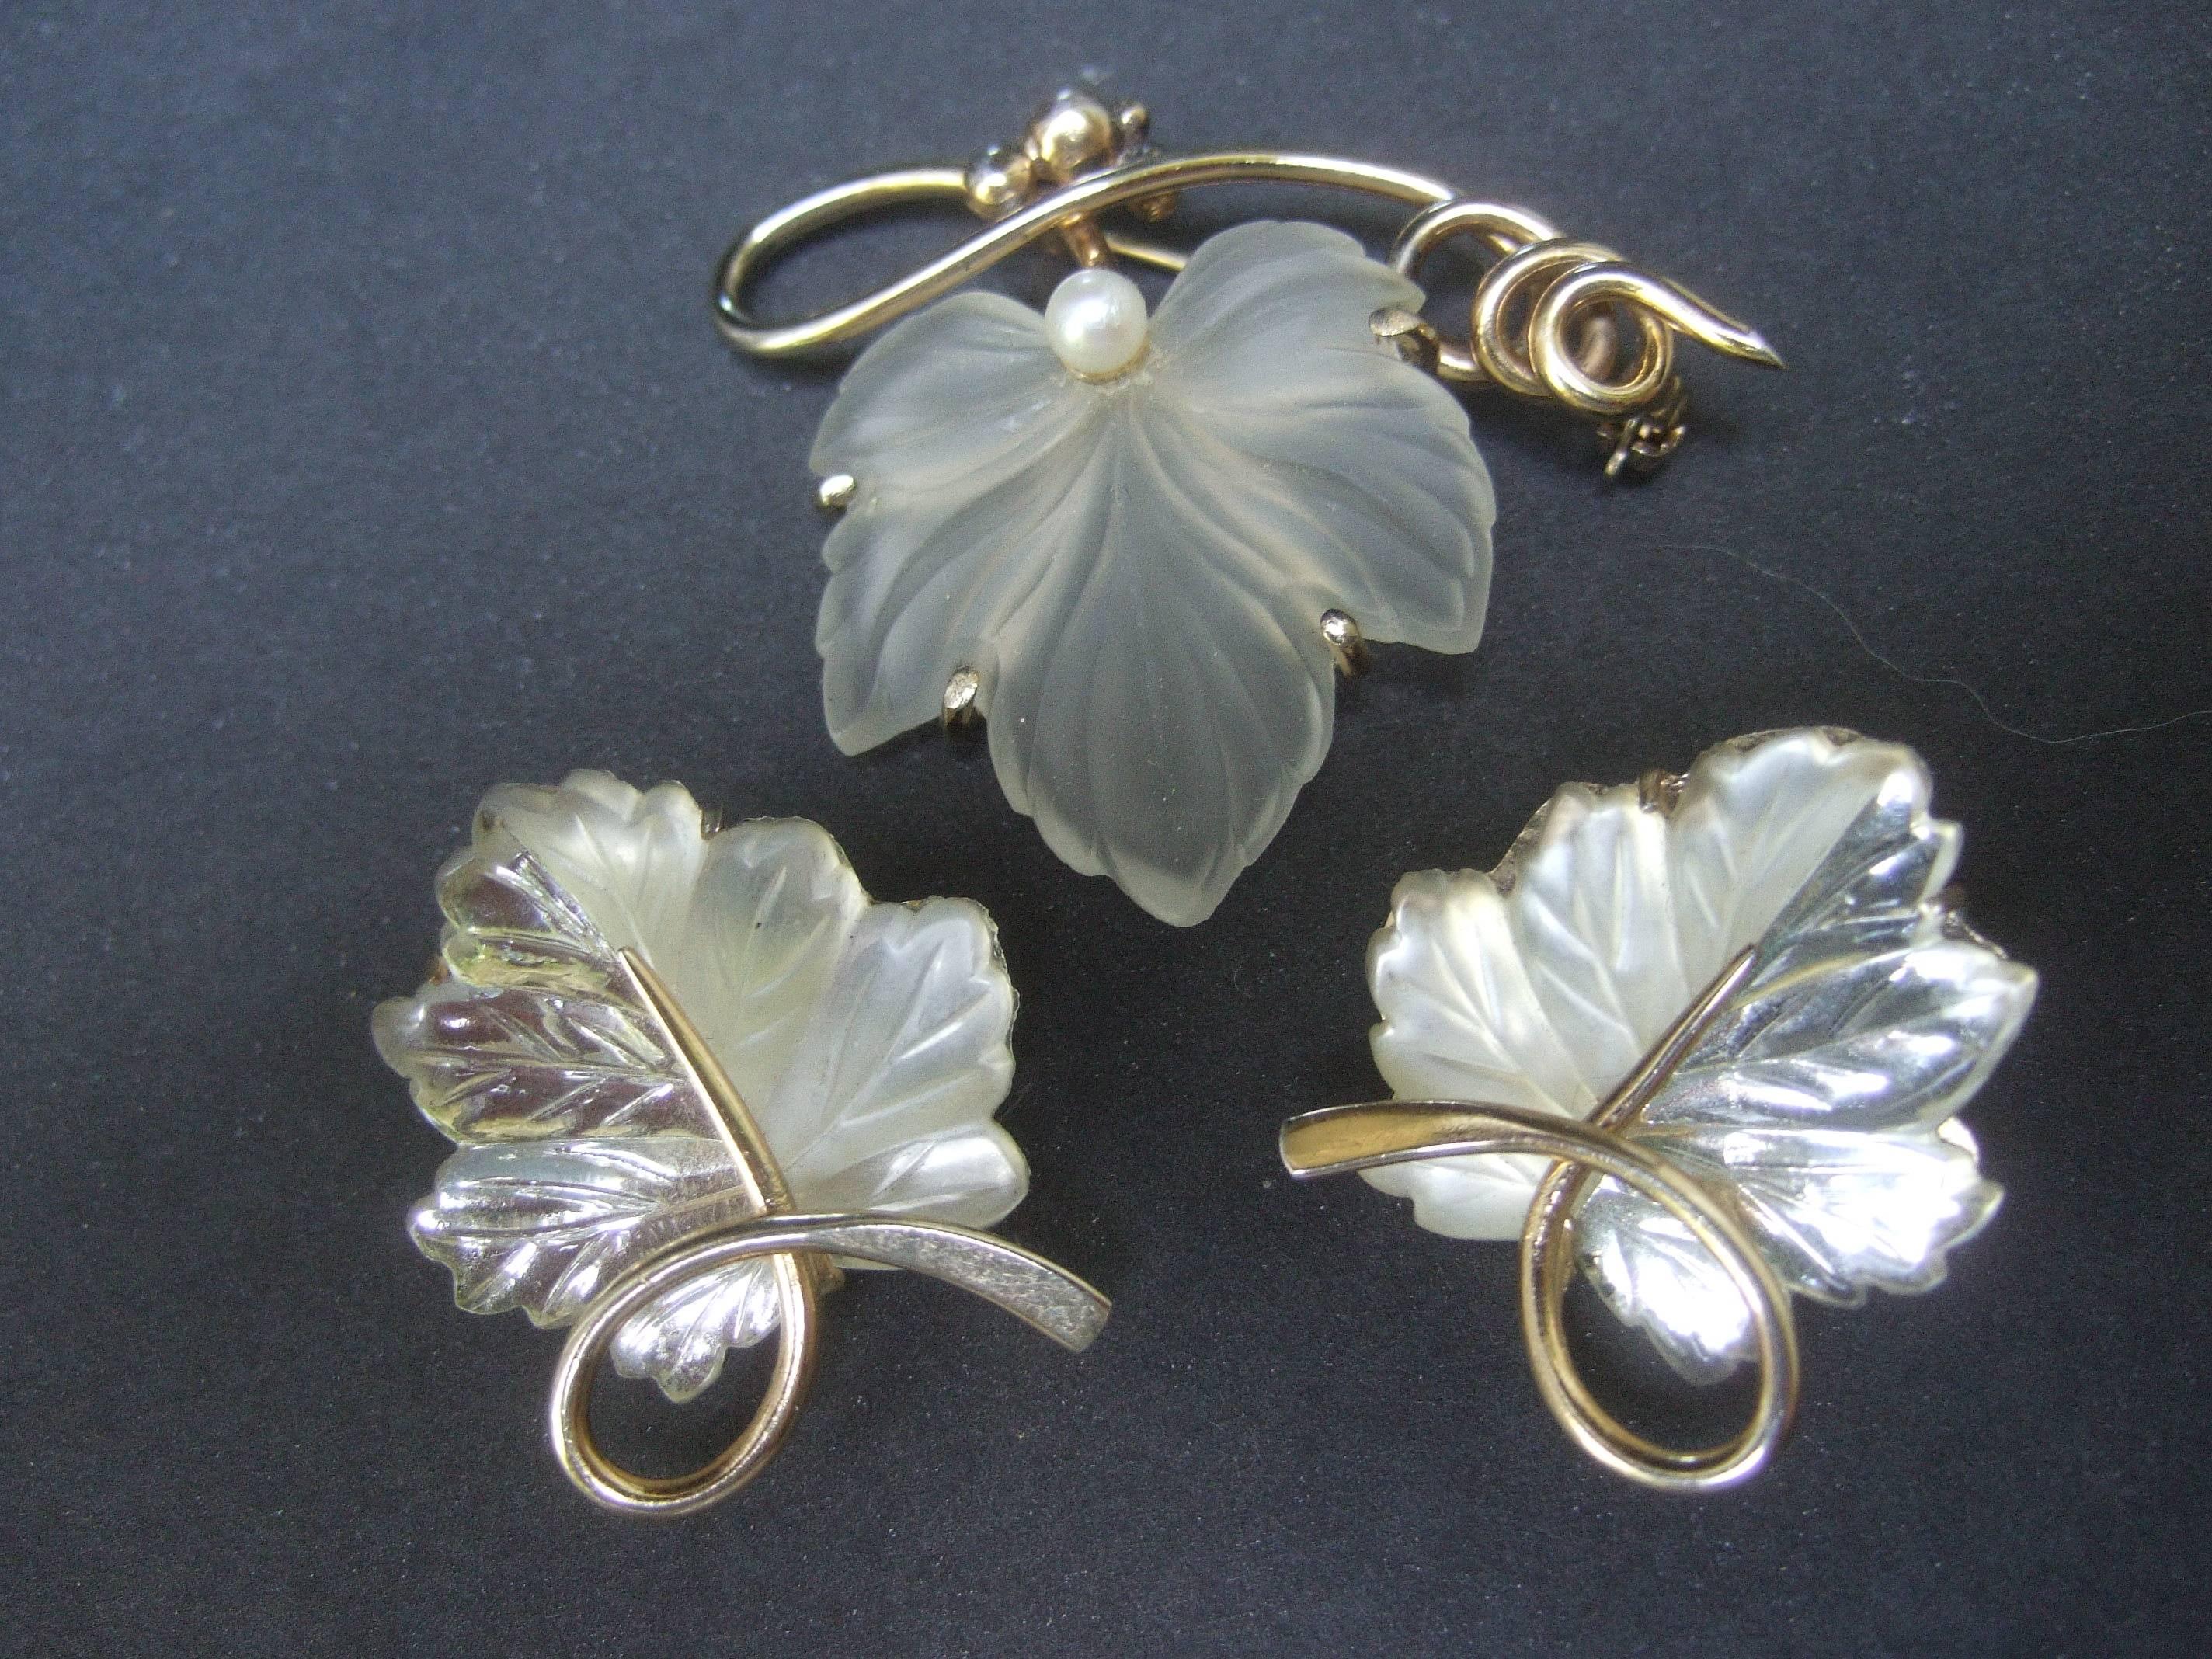 Napier sterling silver frosted glass leaf brooch & earrings c 1960
The elegantly refined brooch is designed with opaque
molded glass leaf 

The frosted glass leaf is paired with a sinuous sterling 
silver band. Embedded at the base of the leaf